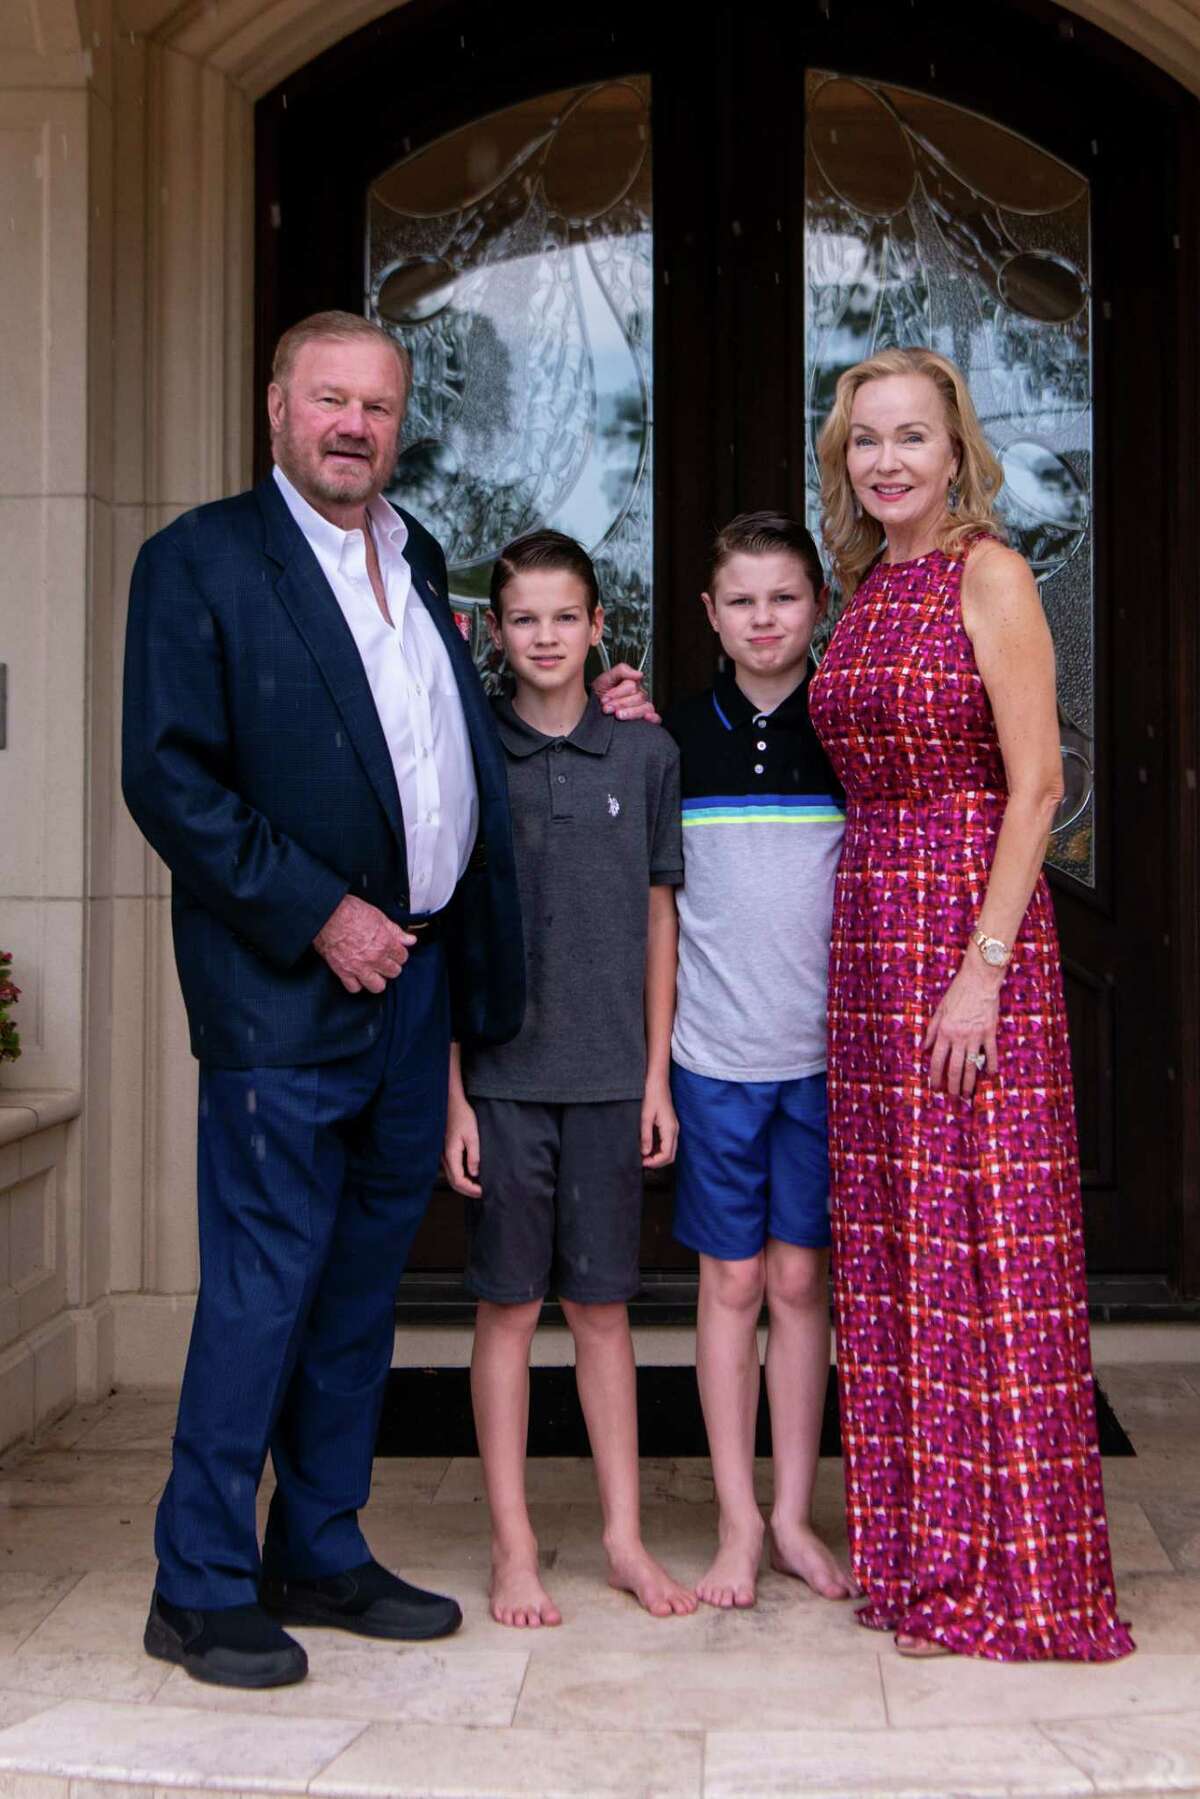 Memorial Hermann 2020 Circle of Life Gala honorees Keith and Alice Mosing with their sons (from left) Marshall and Nicolas Mosing